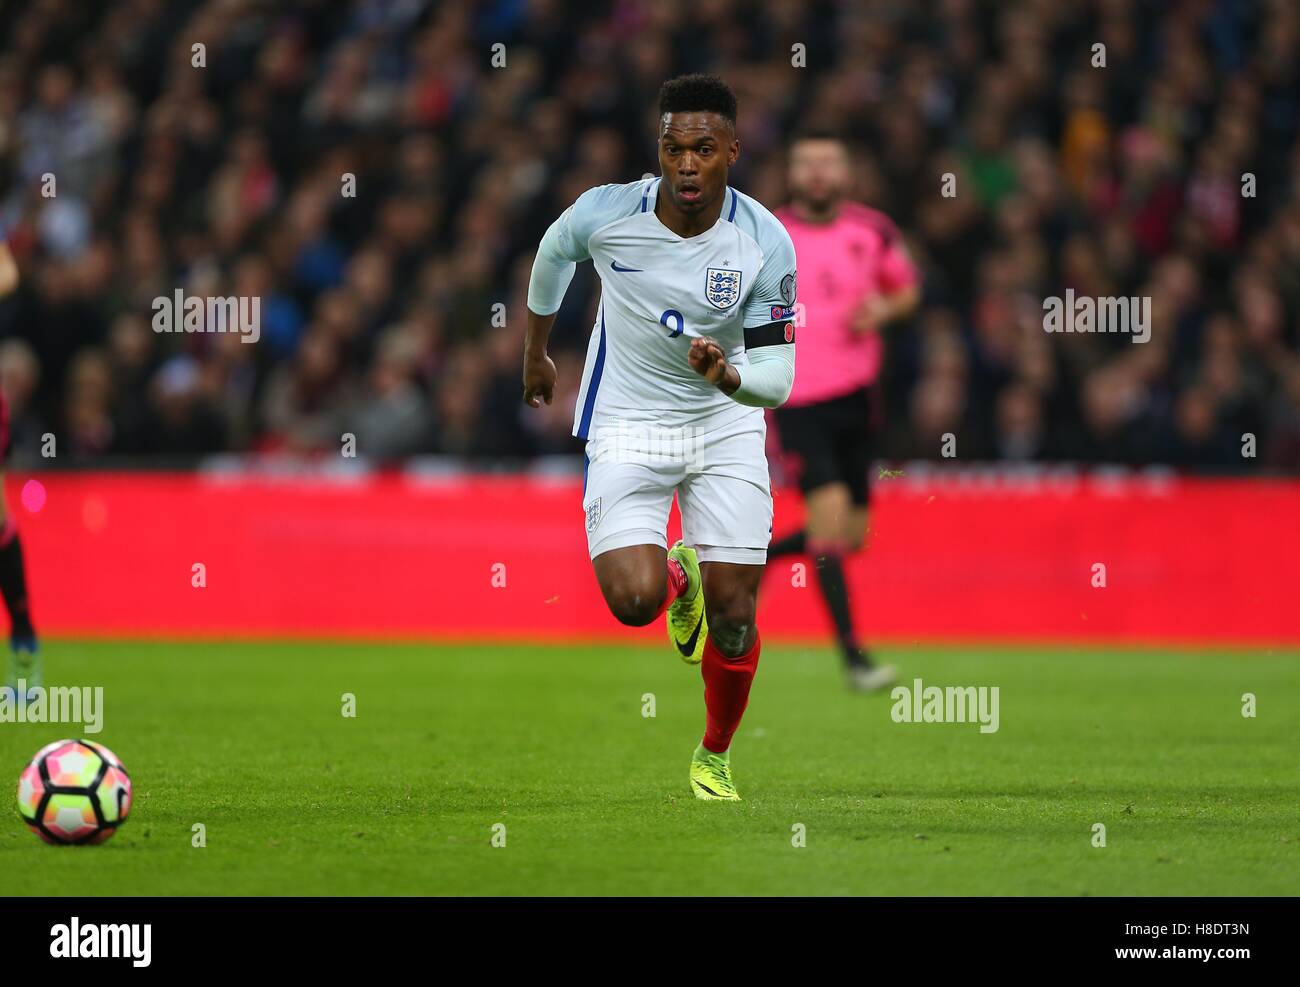 Wembley Stadium, London, UK.11th November 2016.  England’s Daniel Sturridge runs onto a loose ball during the FIFA World Cup Qualifier match between England and Scotland at Wembley Stadium in London.  Credit: Telephoto Images / Alamy Live News Stock Photo